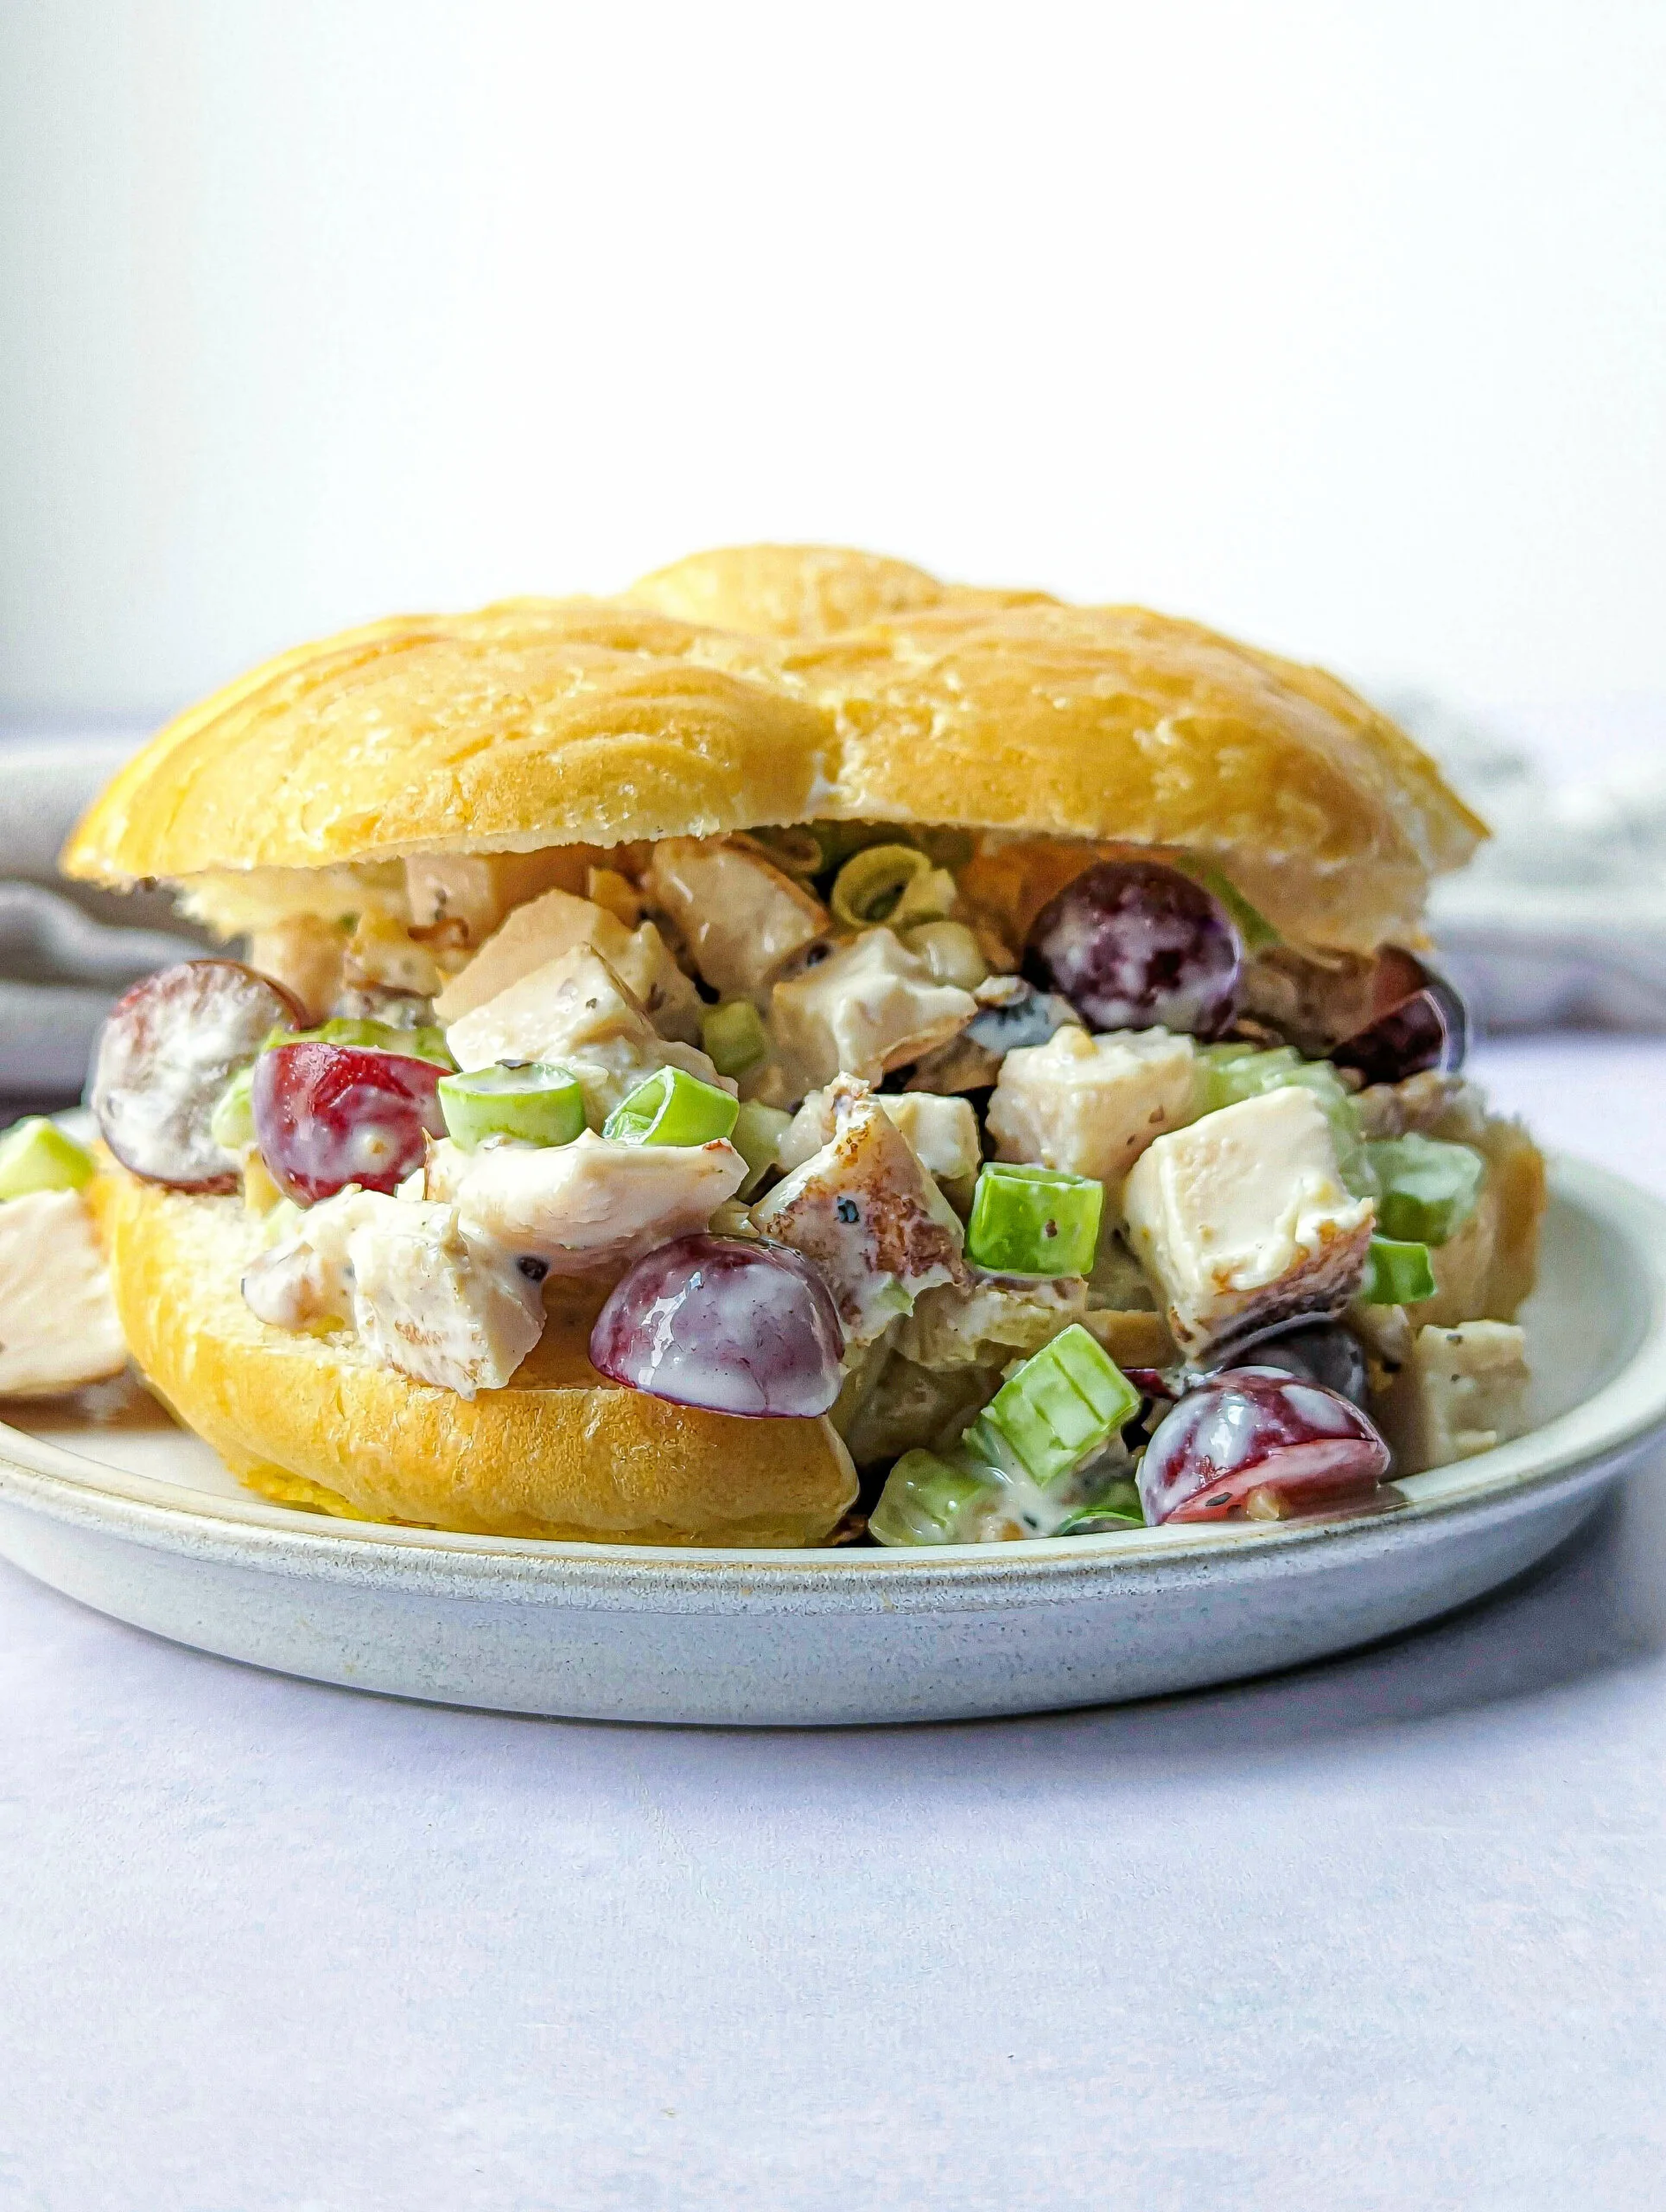 A croissant filled with california chicken salad.